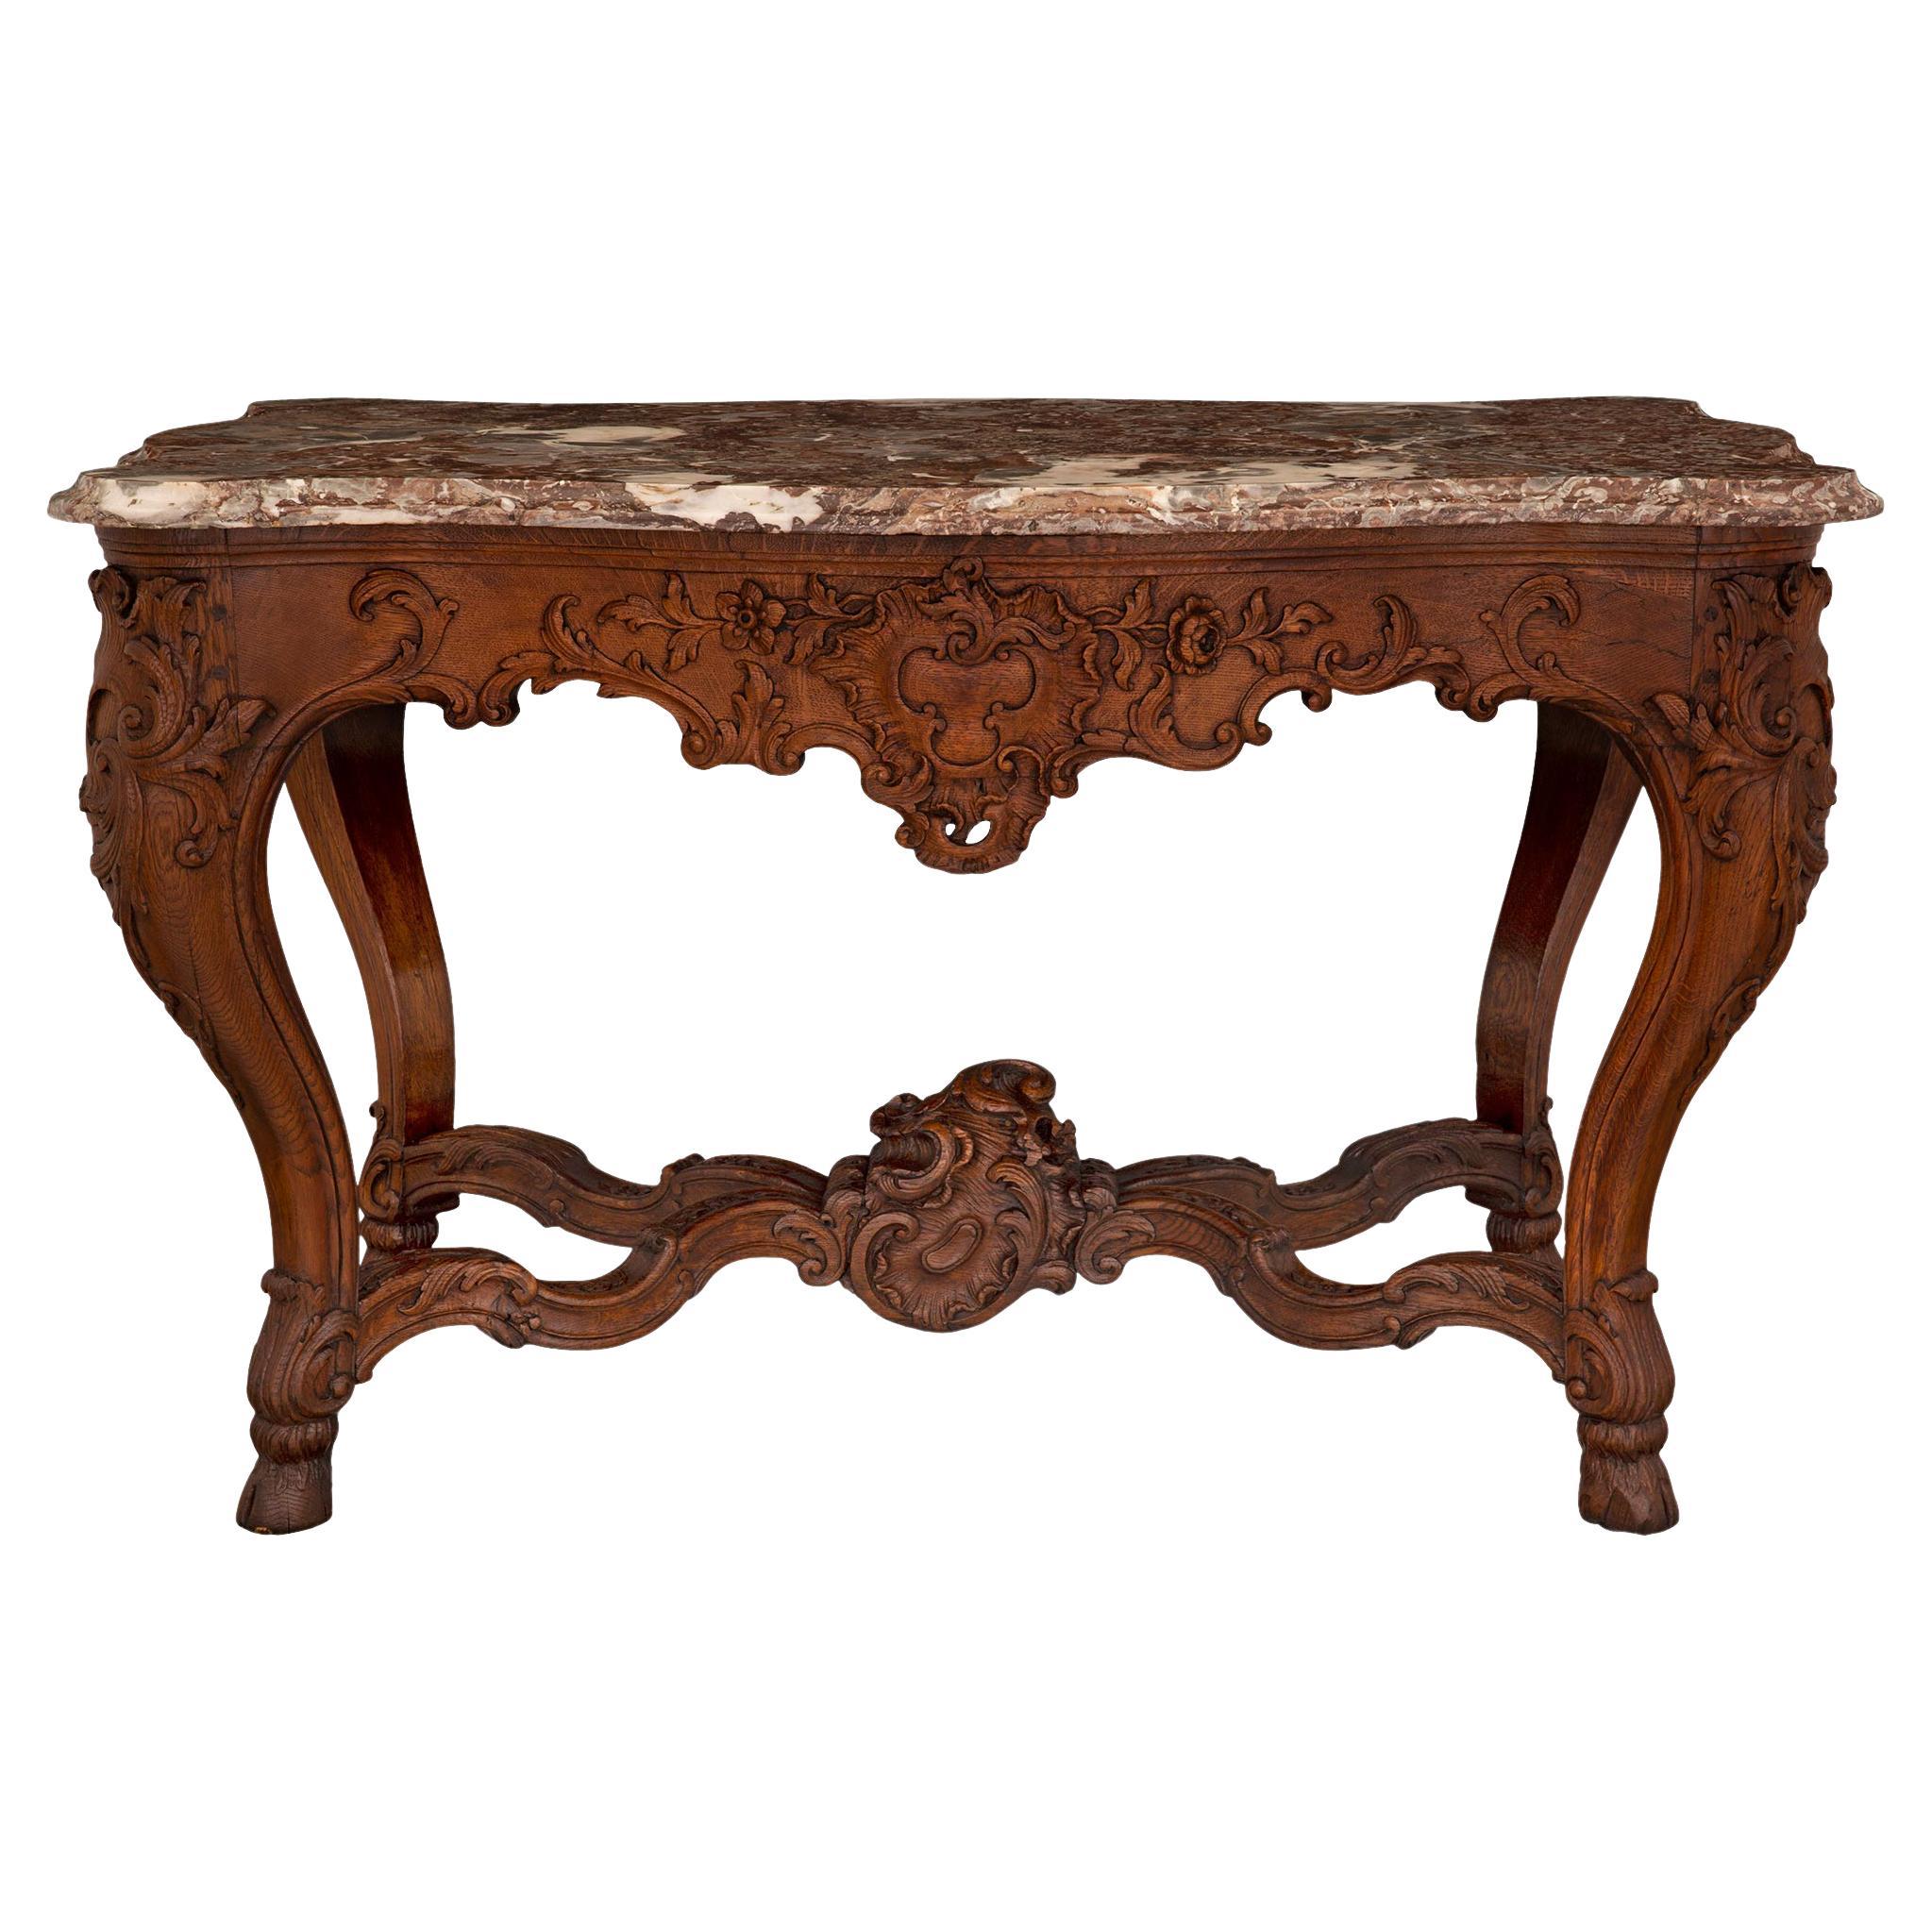 French 18th Century Régence Period Walnut And Marble Center Table For Sale